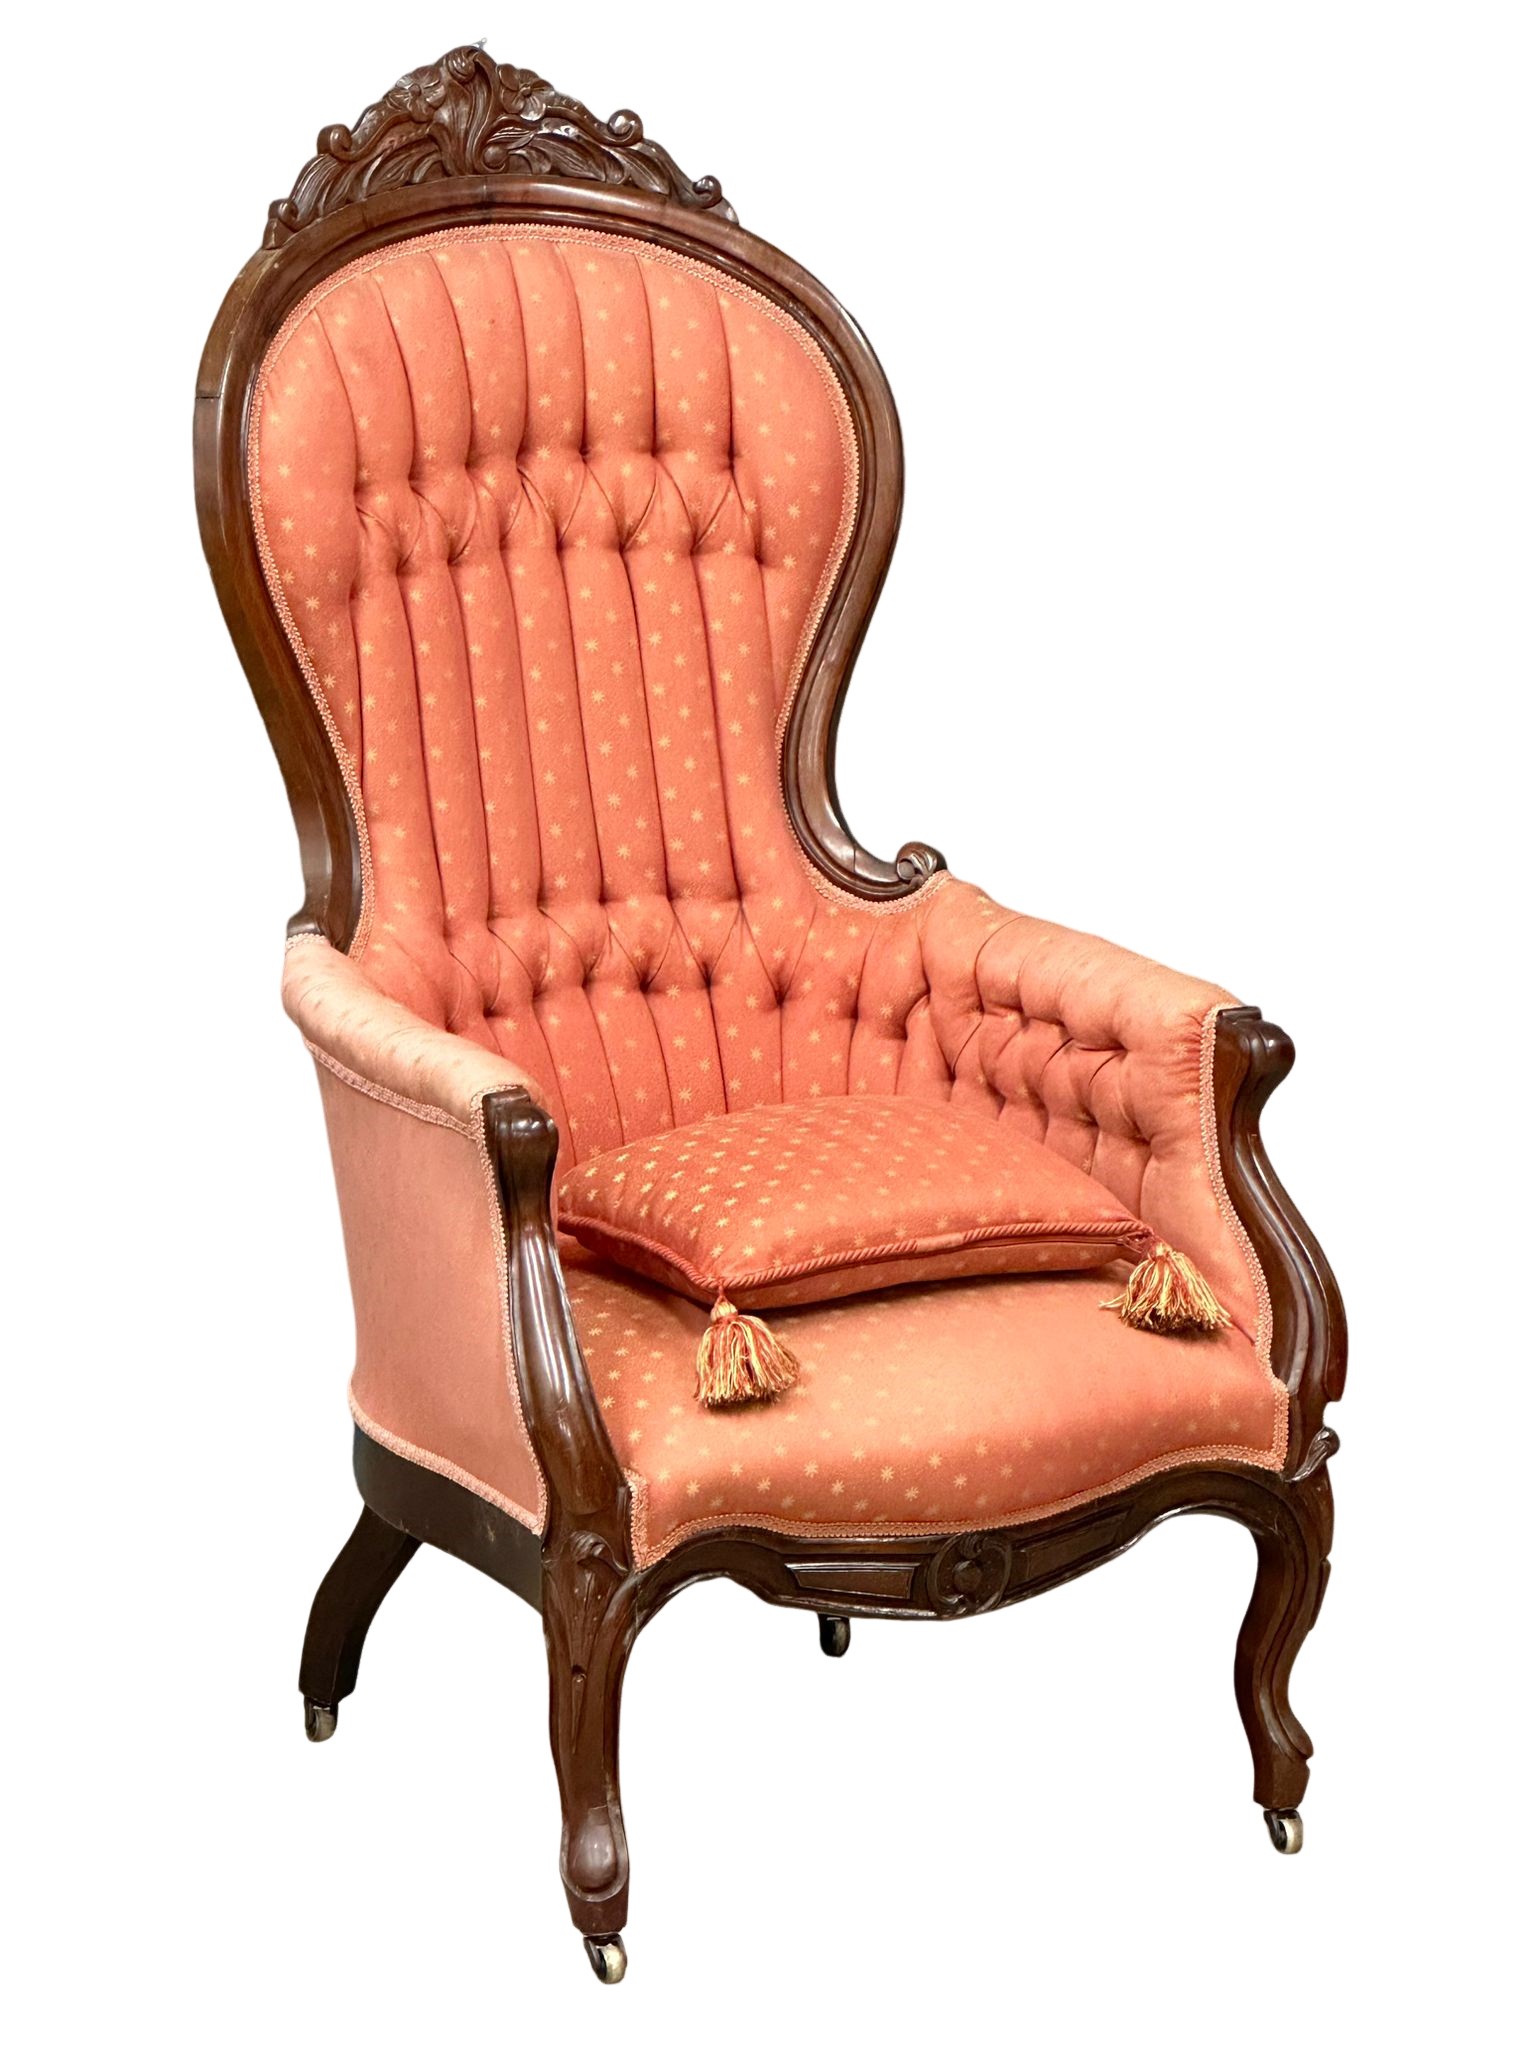 A Victorian mahogany deep buttoned back armchair on cabriole legs. - Image 2 of 5